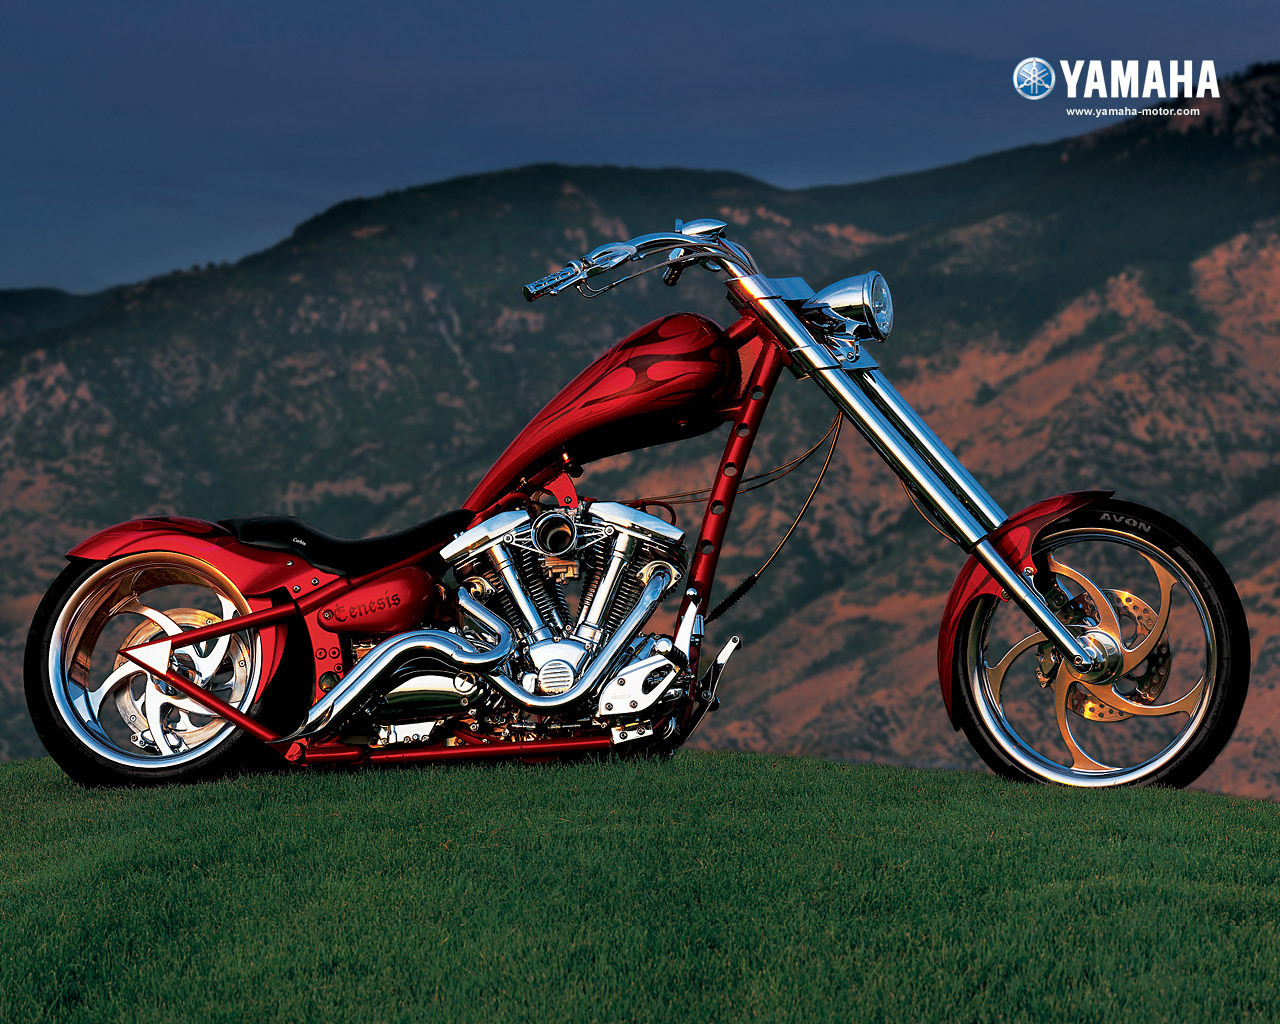 Chopper Motorcycle Wallpapers